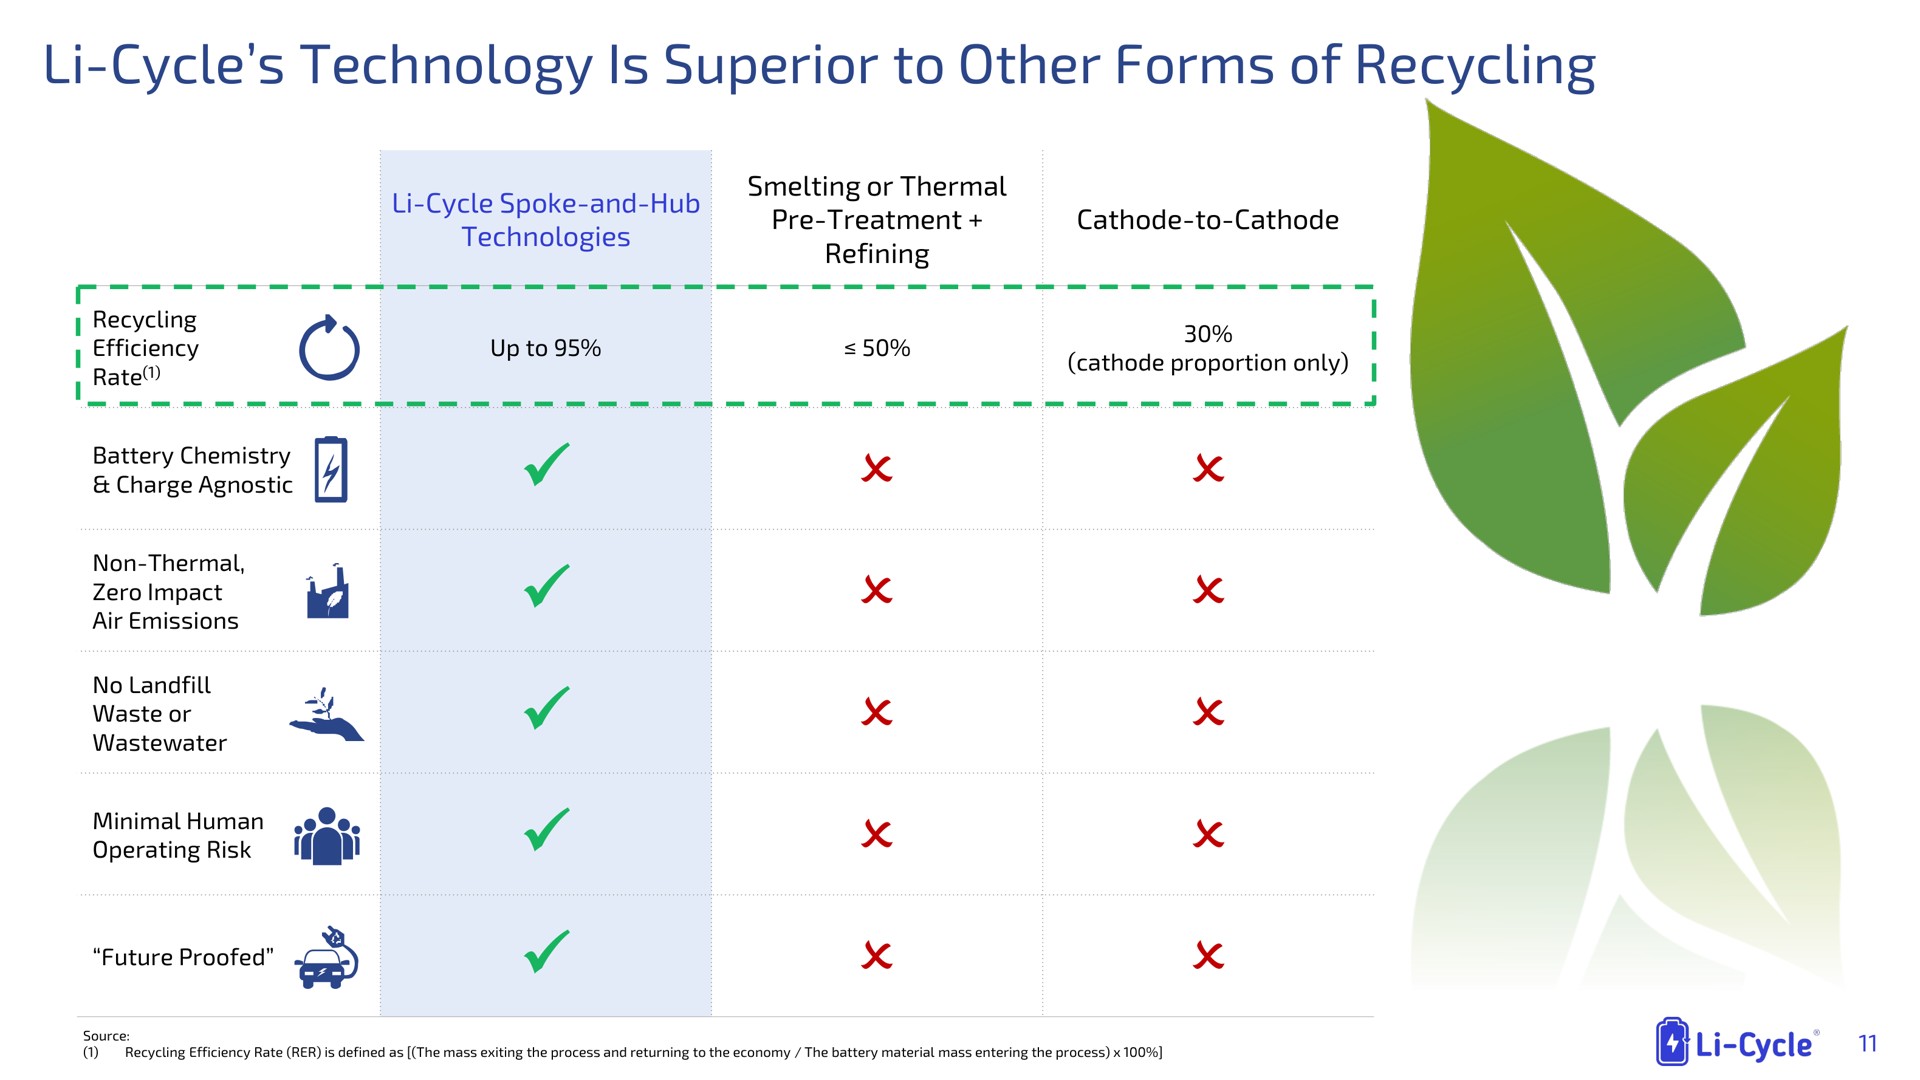 cycle technology is superior to other forms of recycling | Li-Cycle